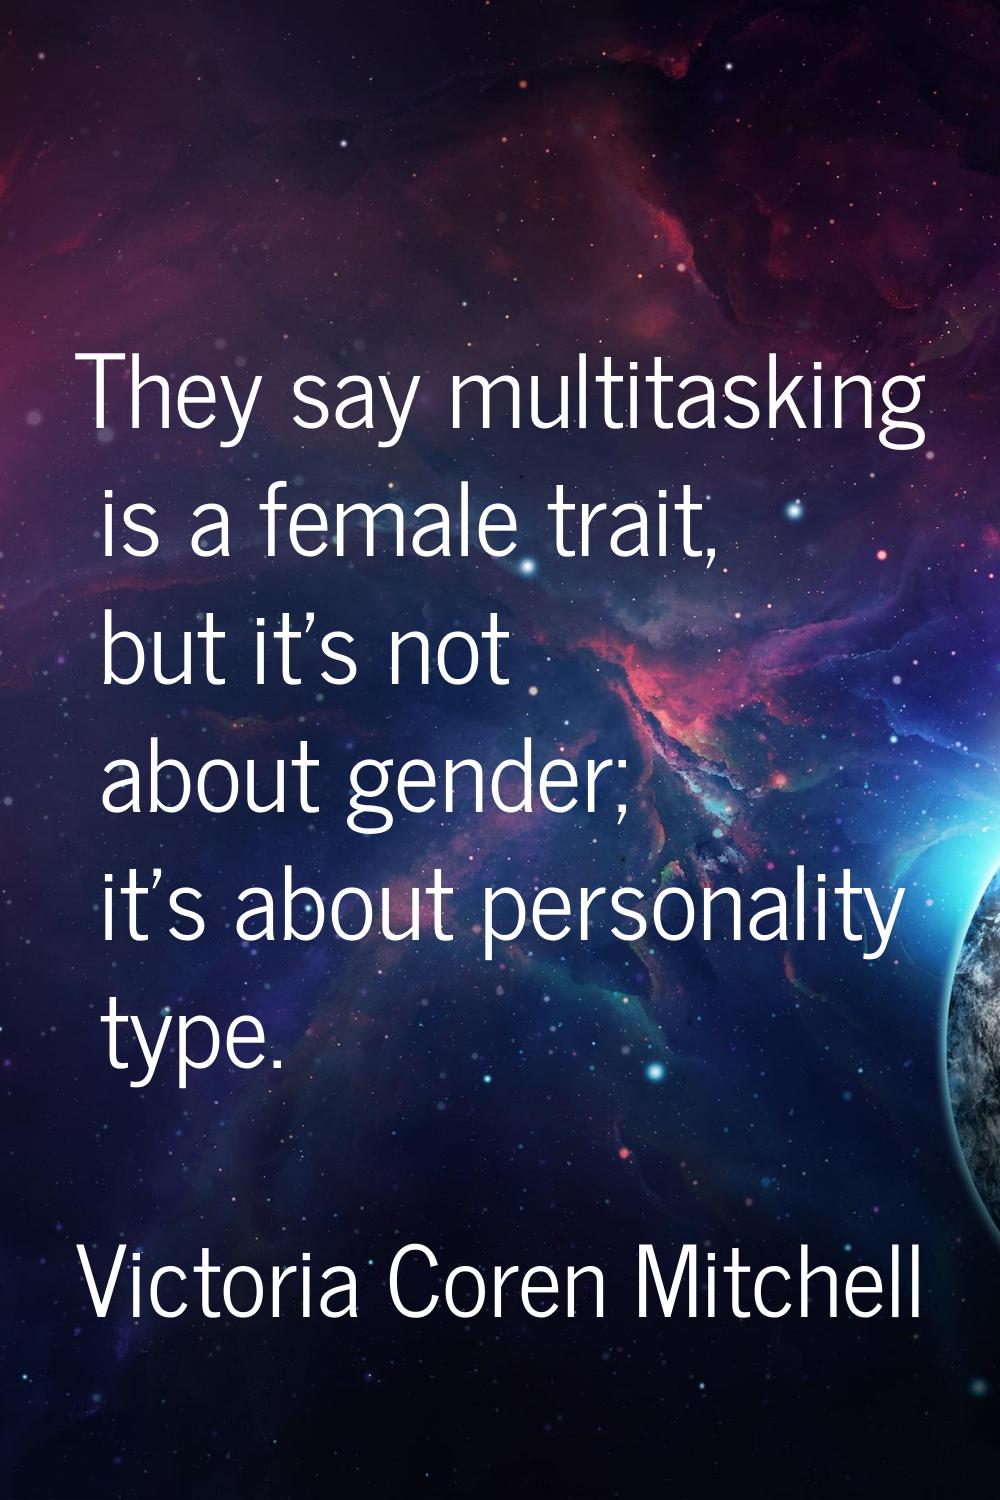 They say multitasking is a female trait, but it's not about gender; it's about personality type.